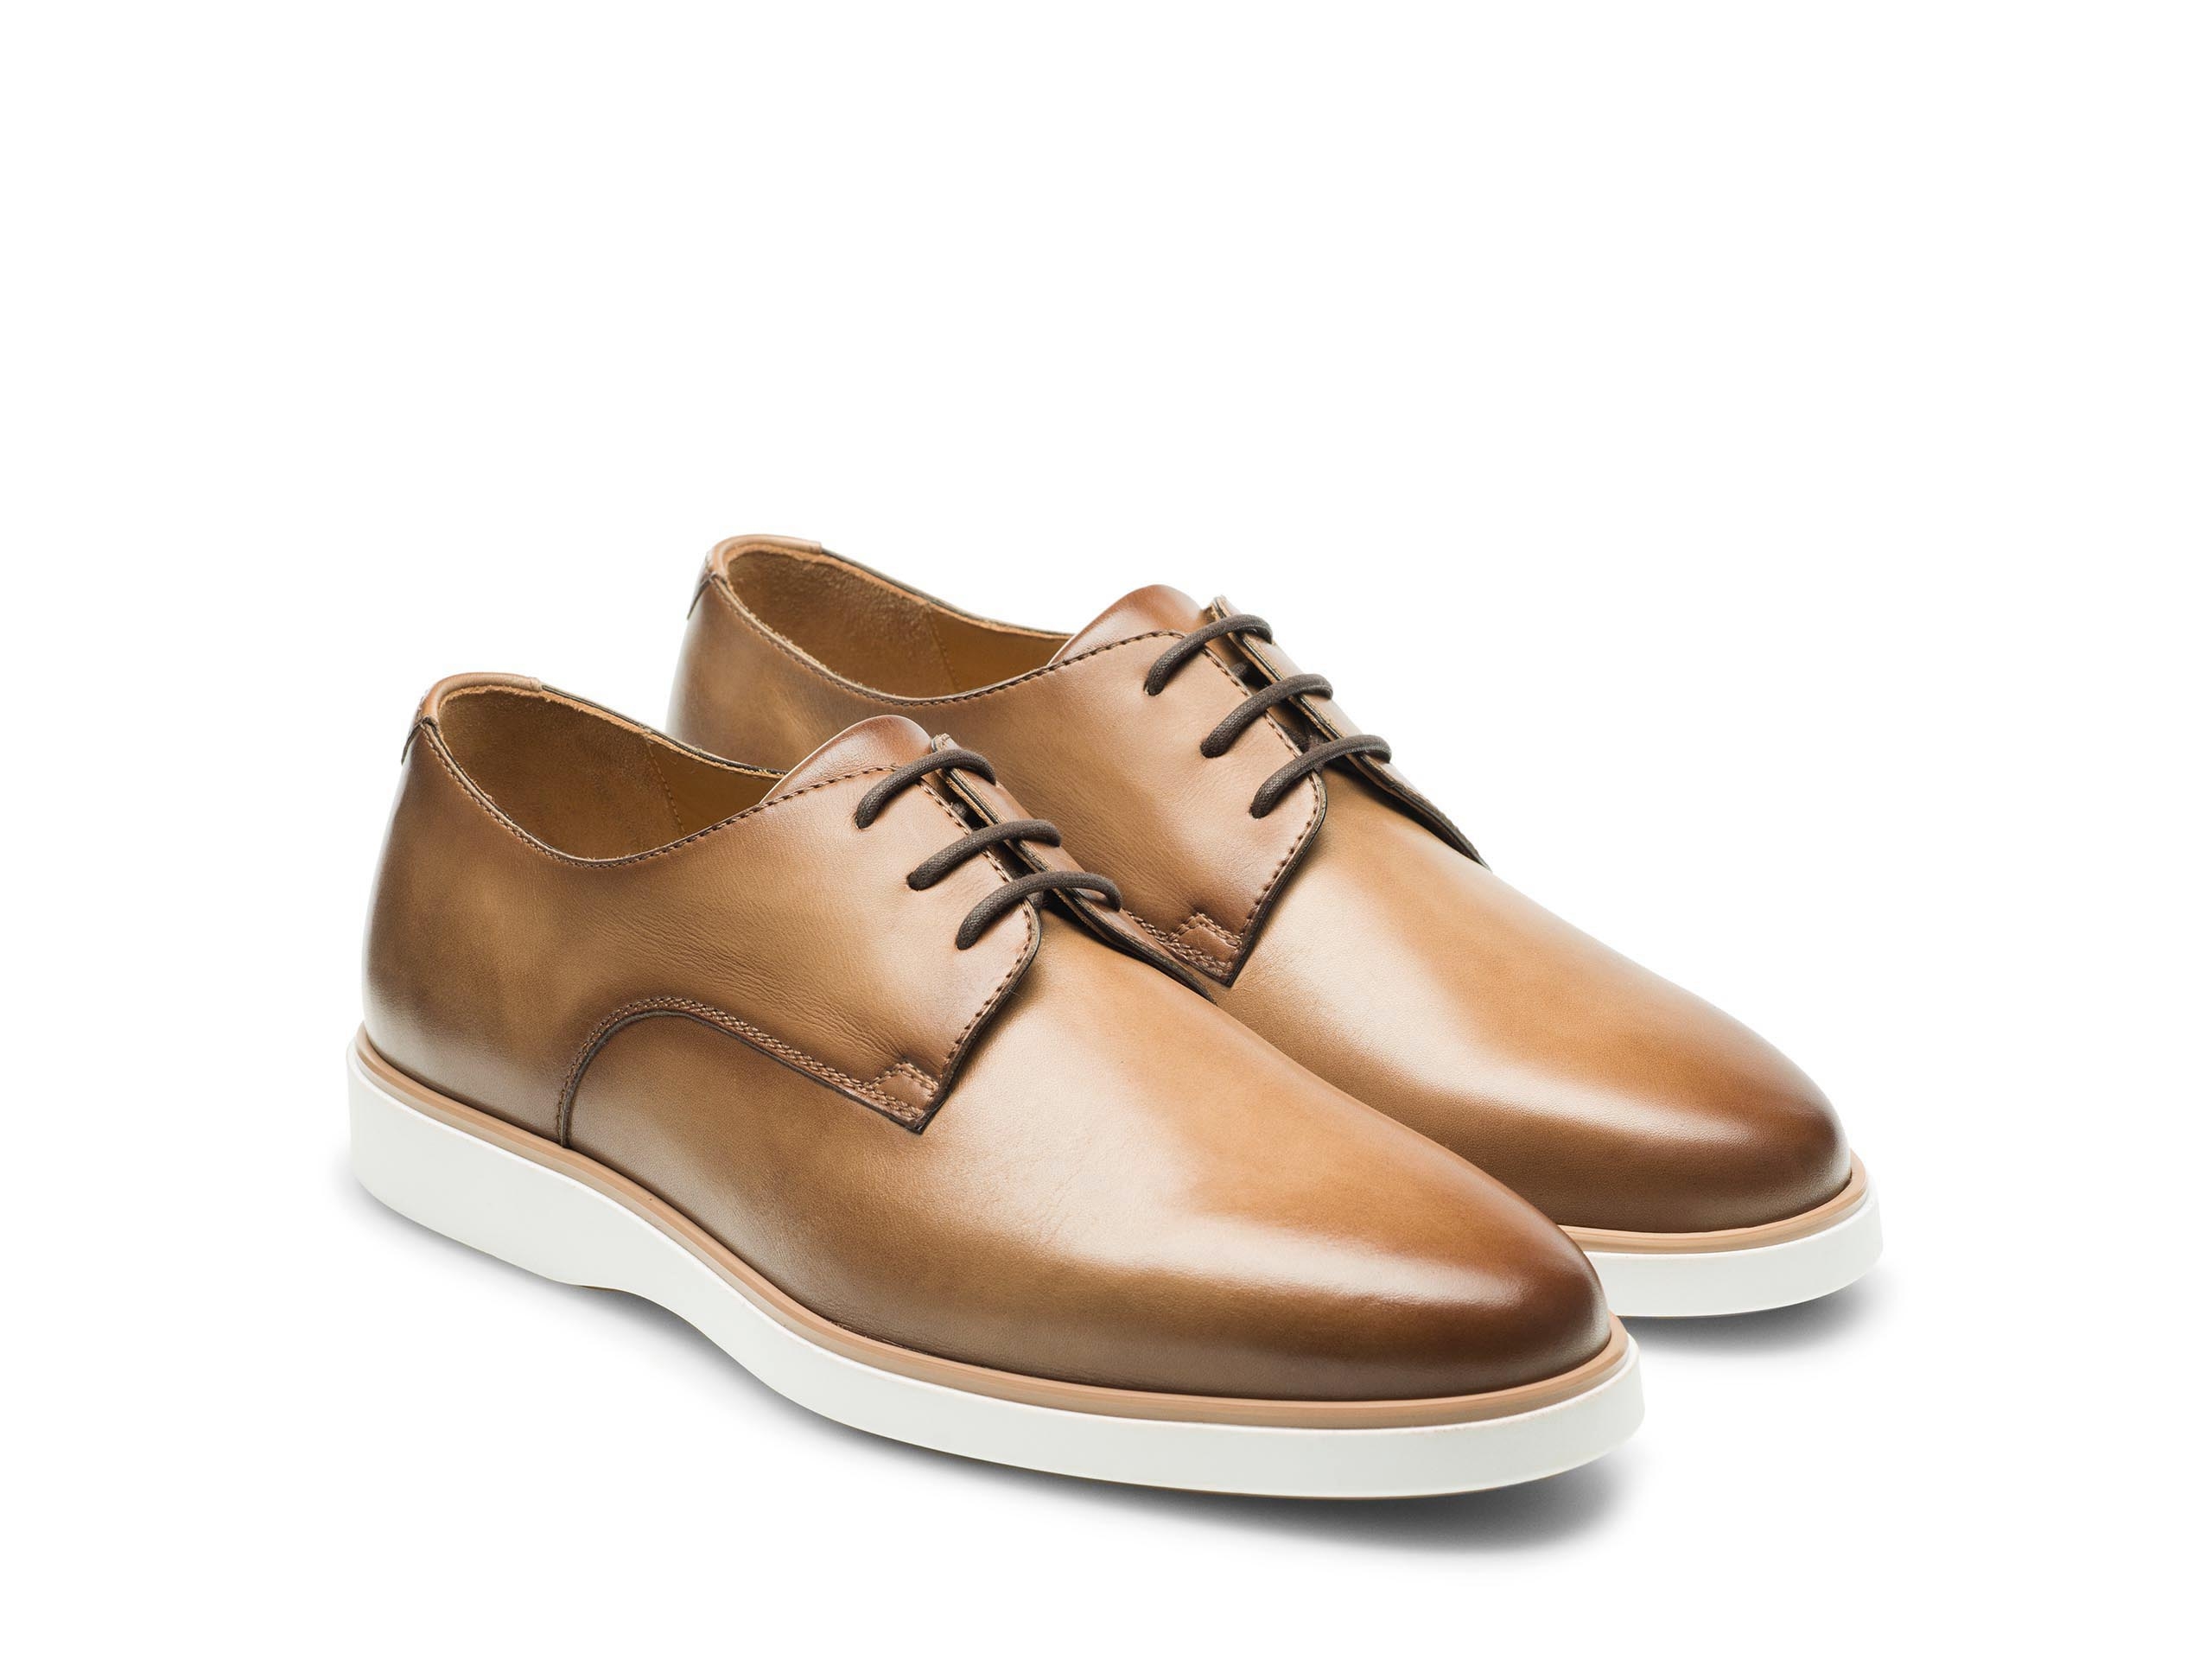 Pair of the Leone Brown